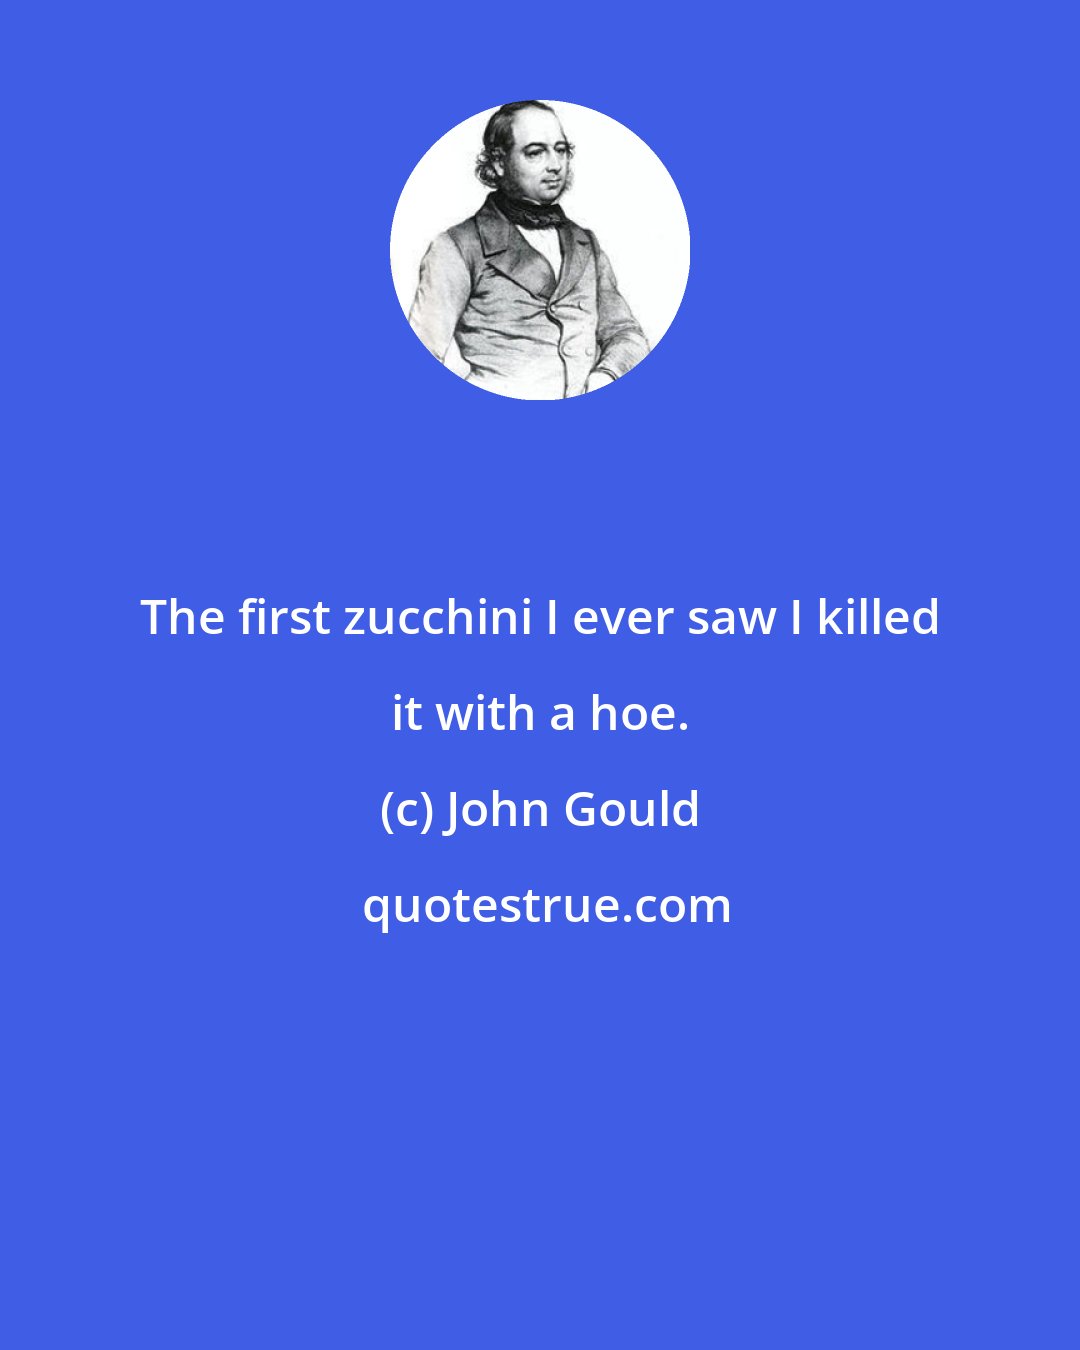 John Gould: The first zucchini I ever saw I killed it with a hoe.